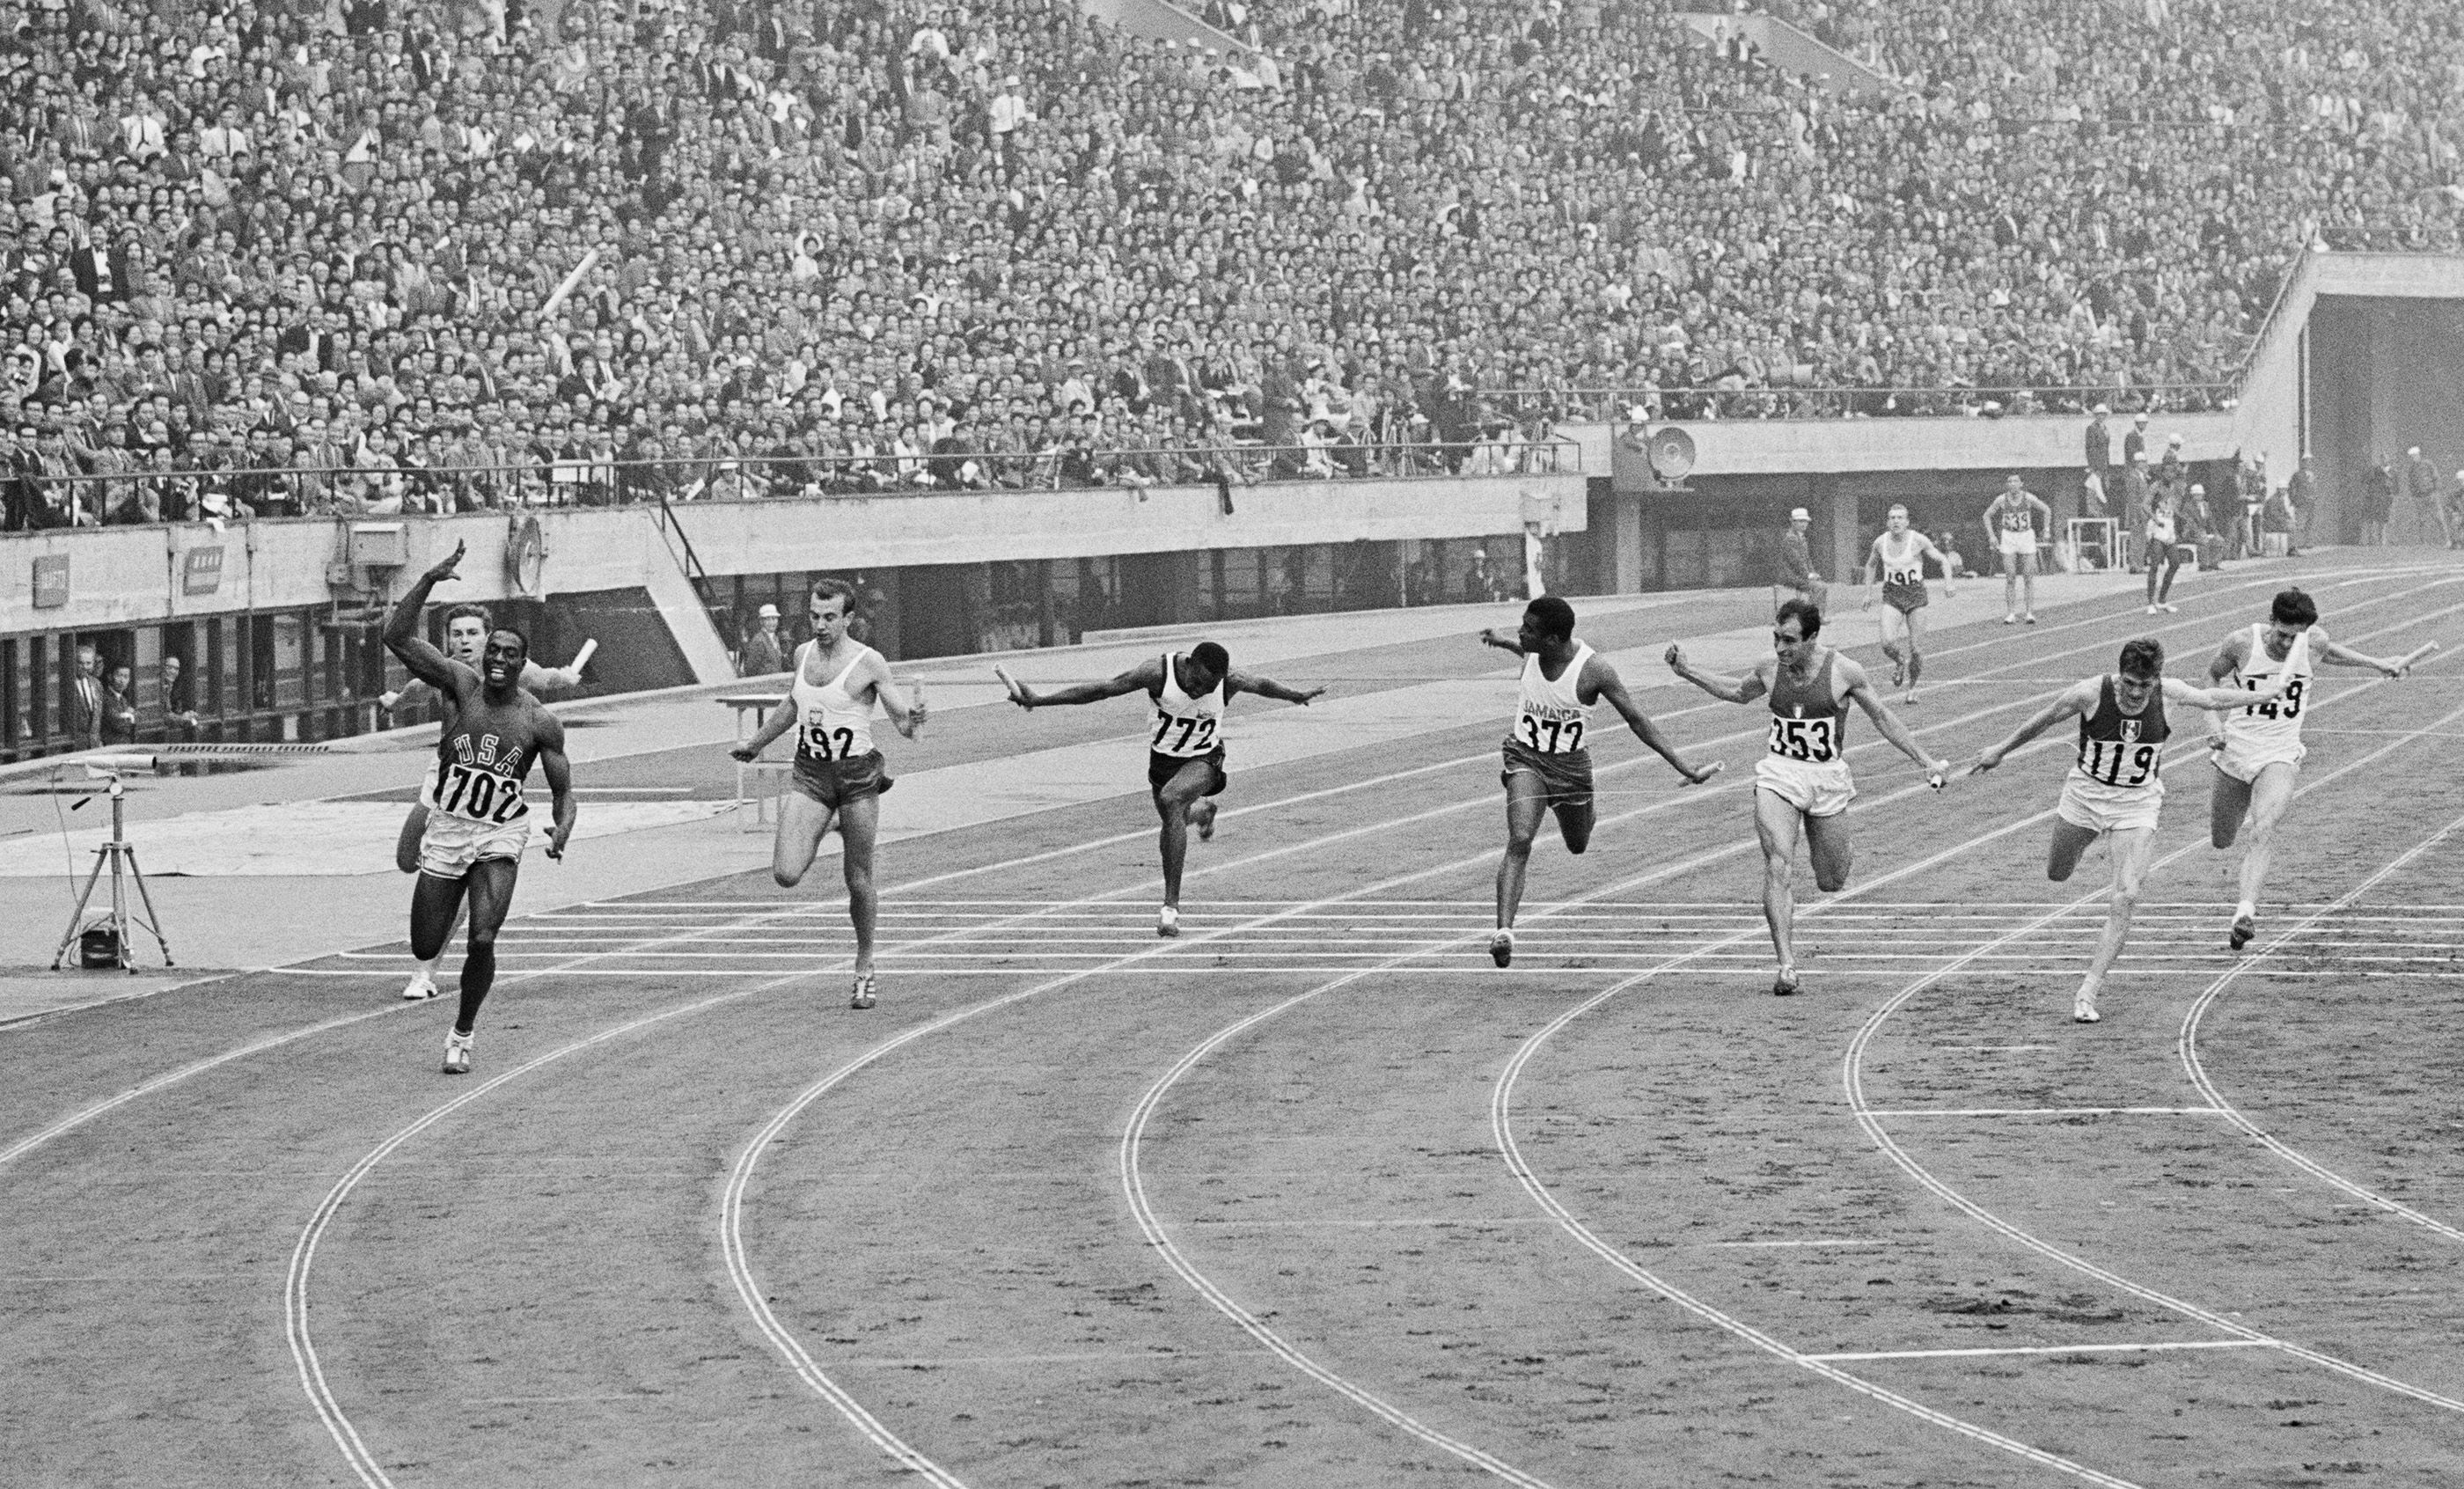 Bob Hayes (702) in the 4x100m at the Tokyo Olympics